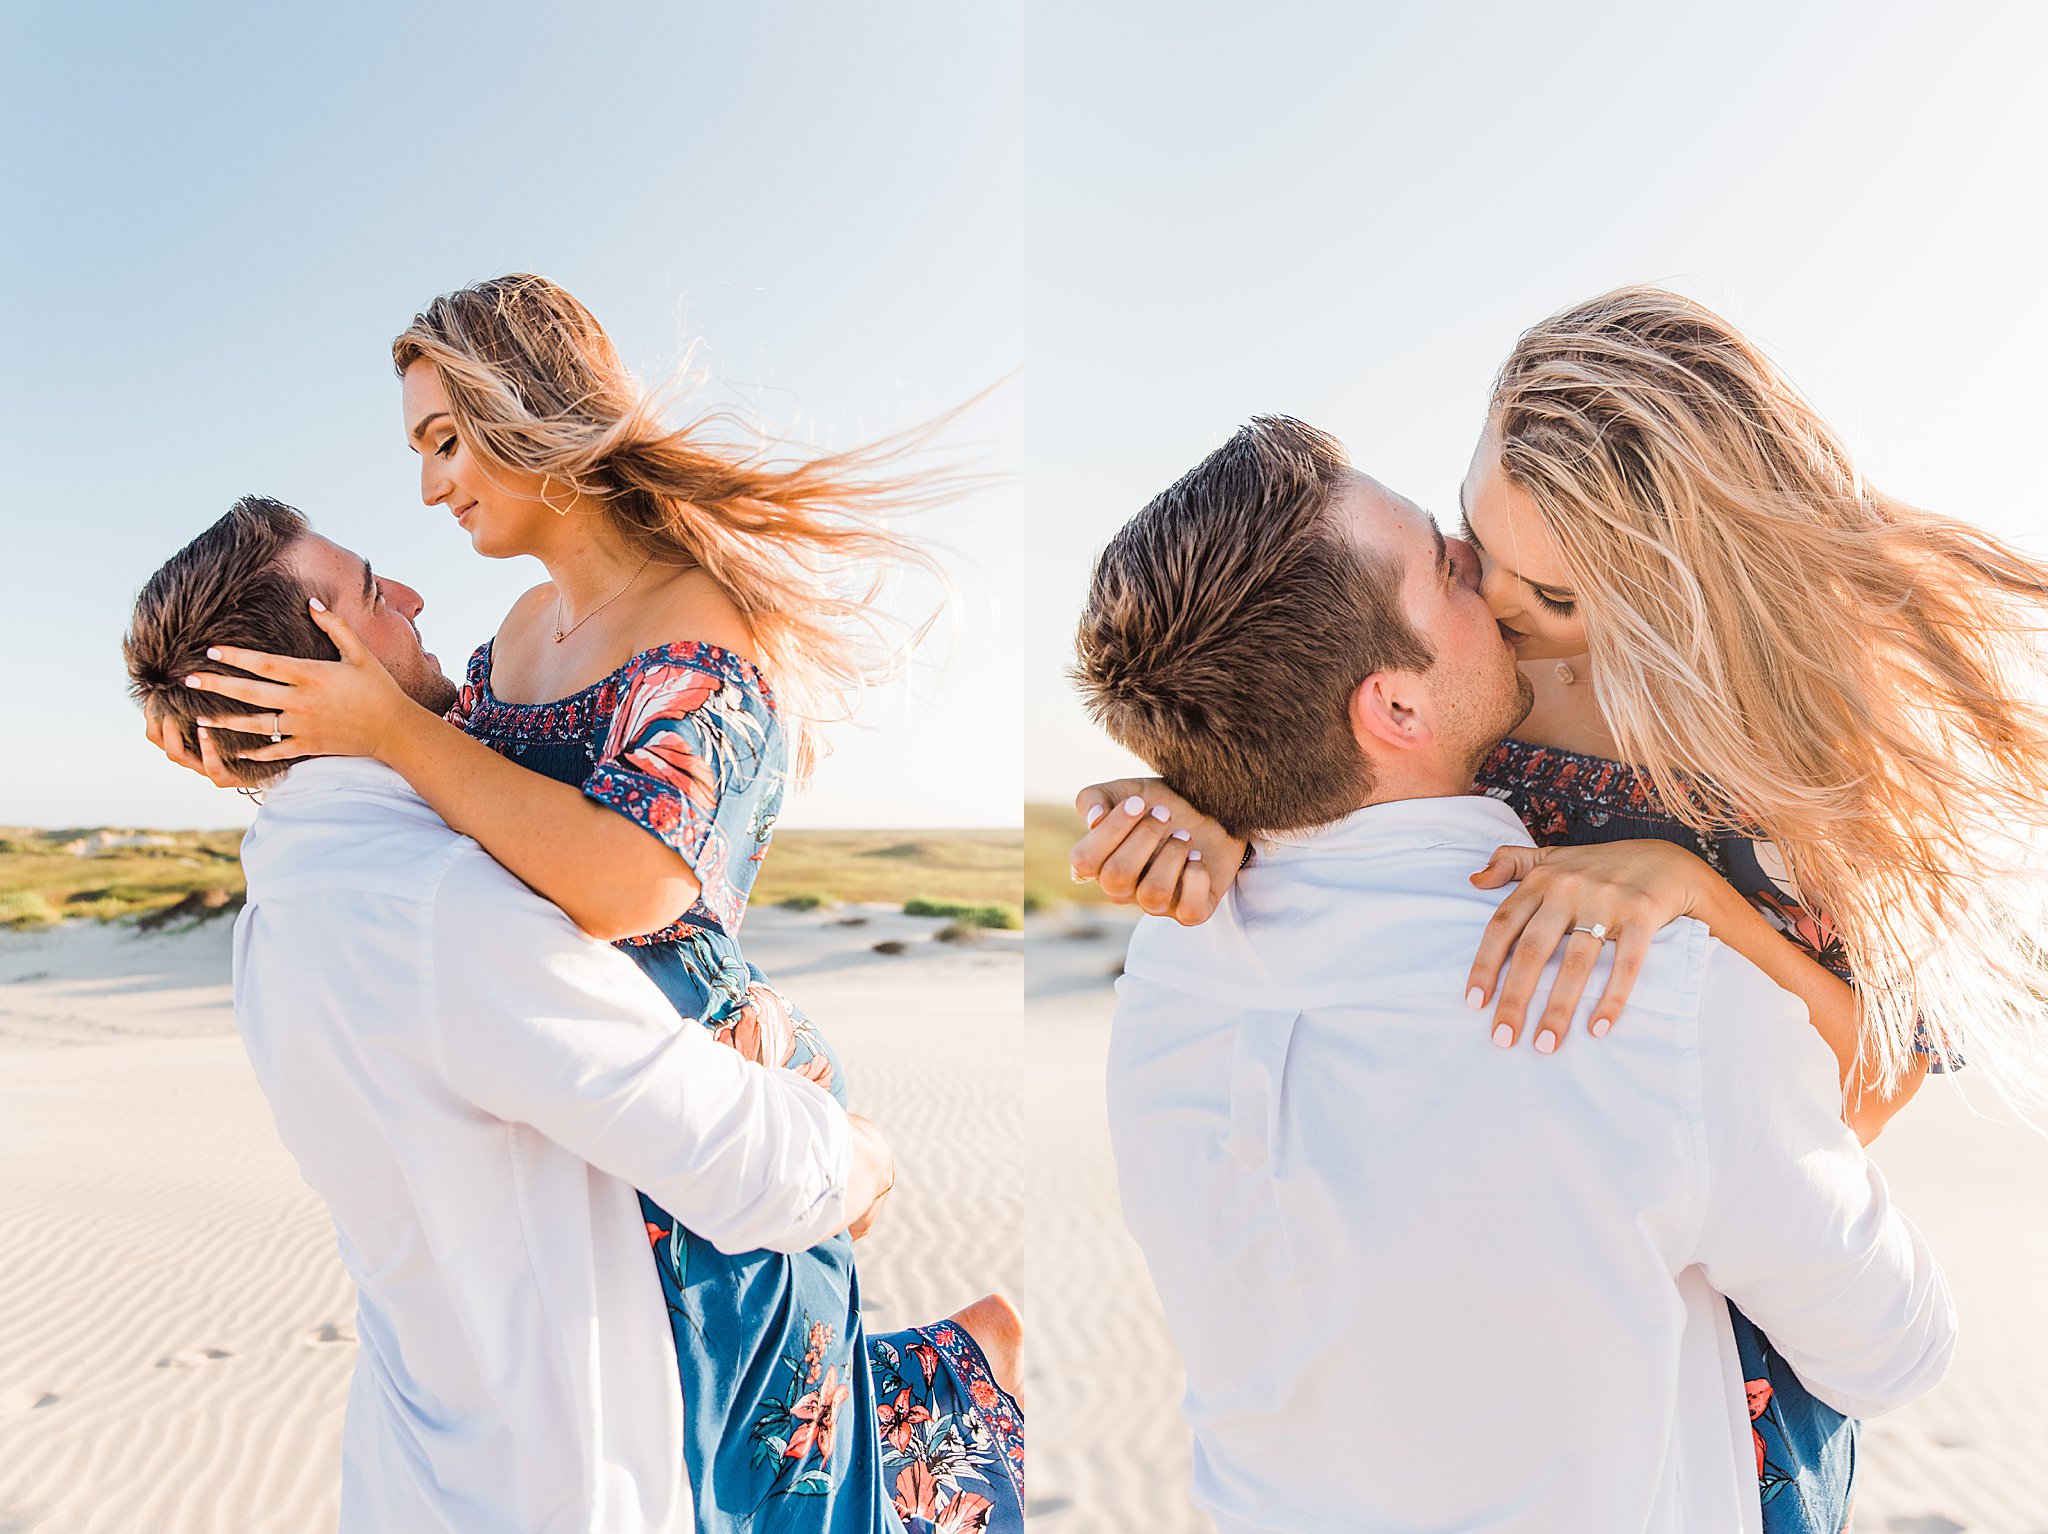 Man in white shirt lifting up and kissing woman in blue floral dress during north padre island engagement.